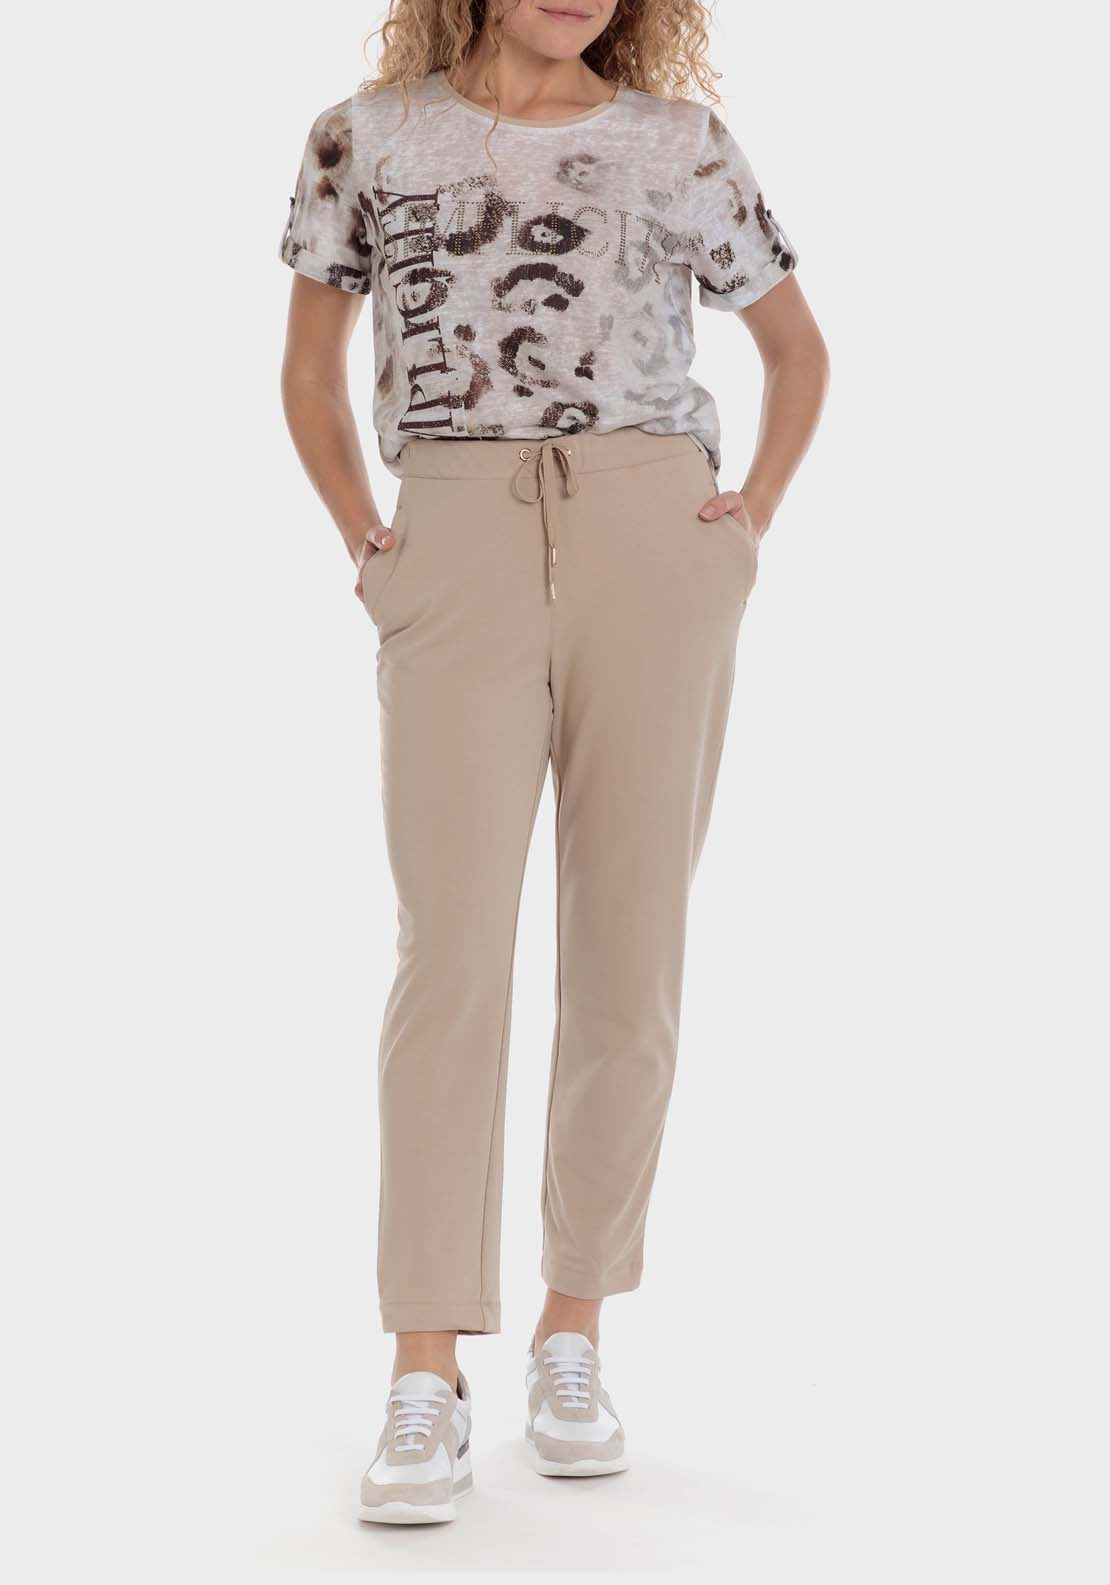 Punt Roma Trousers - Beige 3 Shaws Department Stores